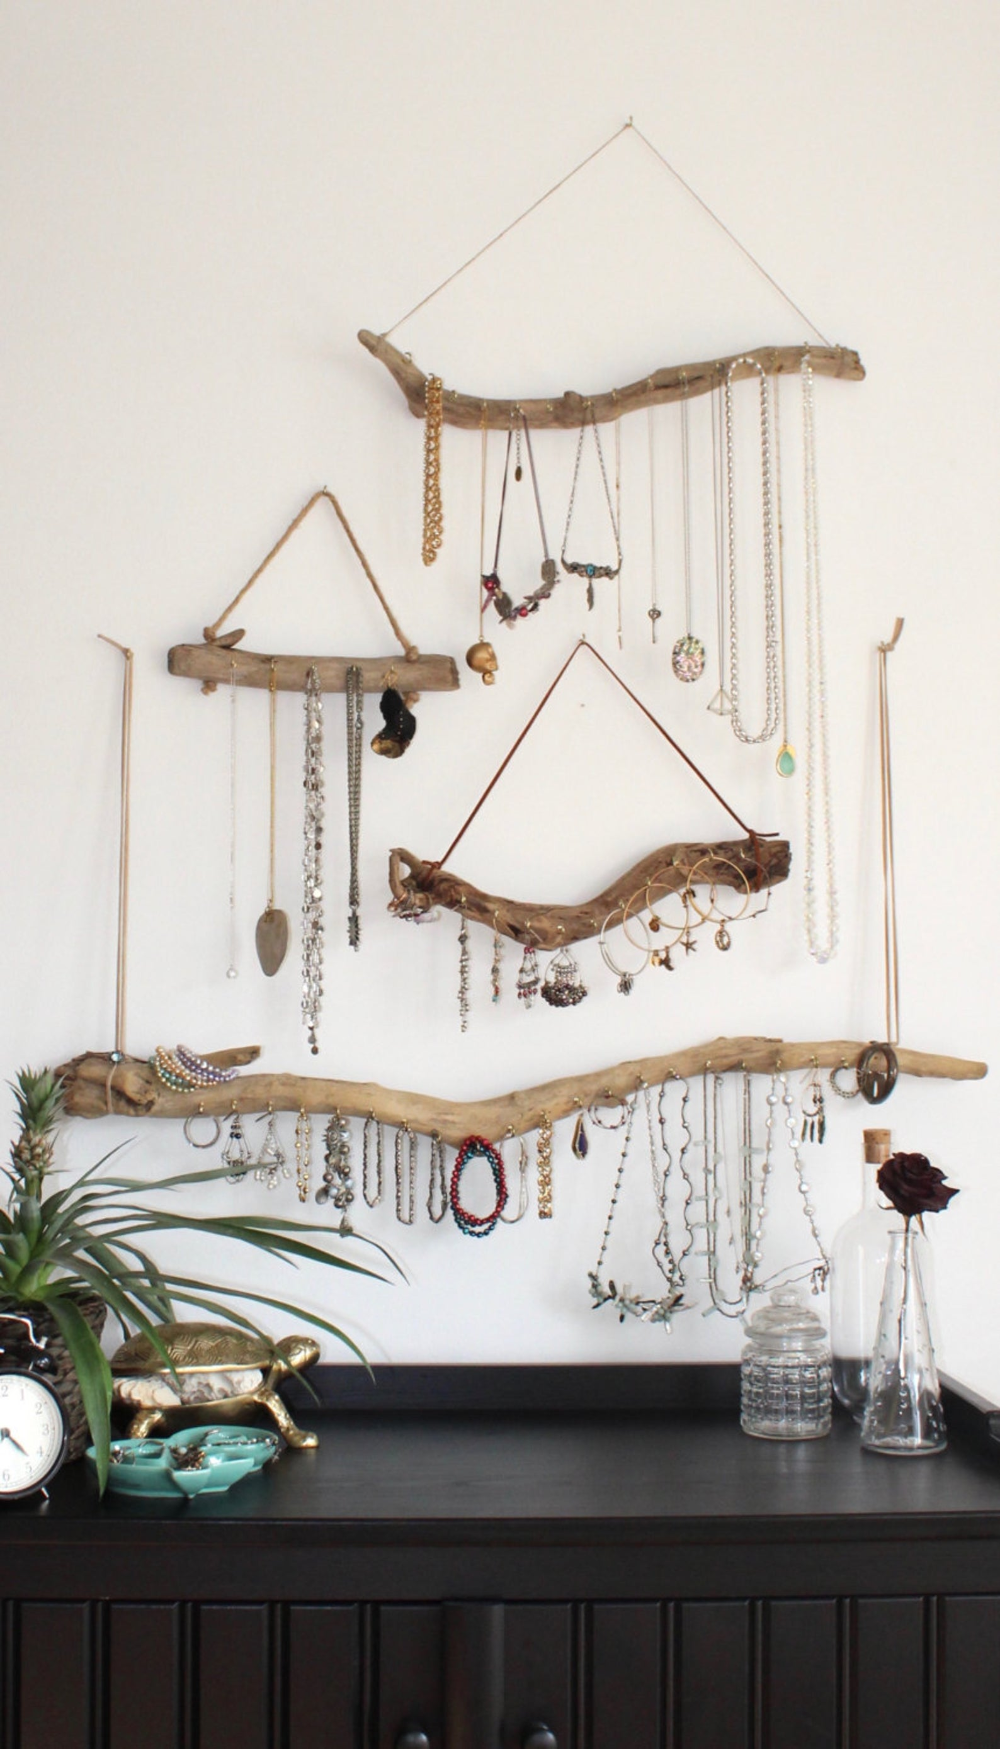 Driftwood Jewelry Organizer - Made to Order Jewelry Hangers - Pick the Driftwood - Boho Decor Small Space Storage Jewelry Display - Driftwood Jewelry Organizer - Made to Order Jewelry Hangers - Pick the Driftwood - Boho Decor Small Space Storage Jewelry Display -   19 diy Jewelry hanger ideas